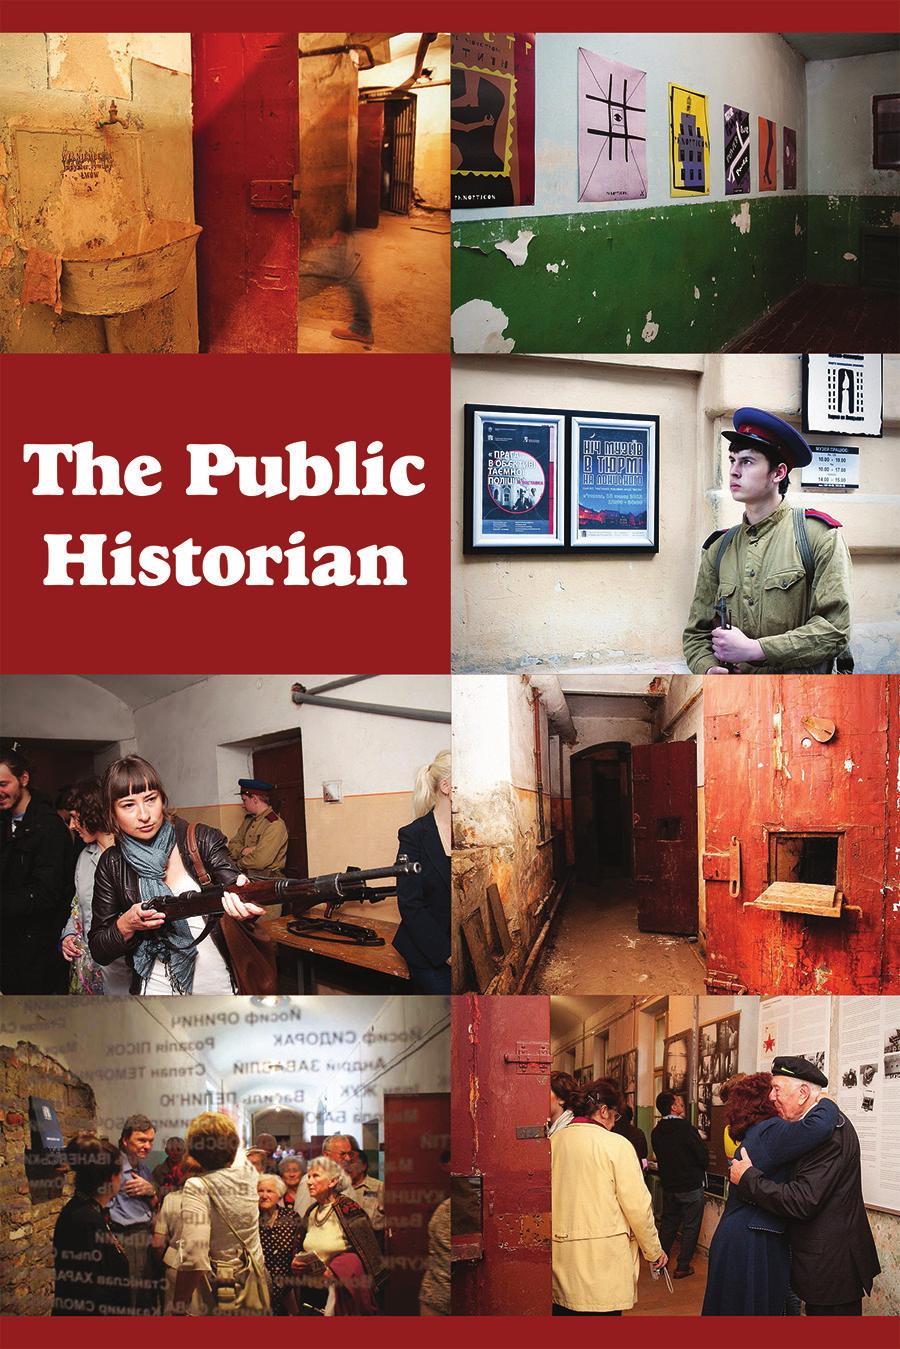 THE PUBLIC HISTORIAN Full page: 4 ½ x 7 ½ $ 385 Half page: 4 ½ x 3 ¾ $ 300 February December 15 January 1 May March 15 April 1 August June 15 July 1 November September 15 October 1 THE PUBLIC